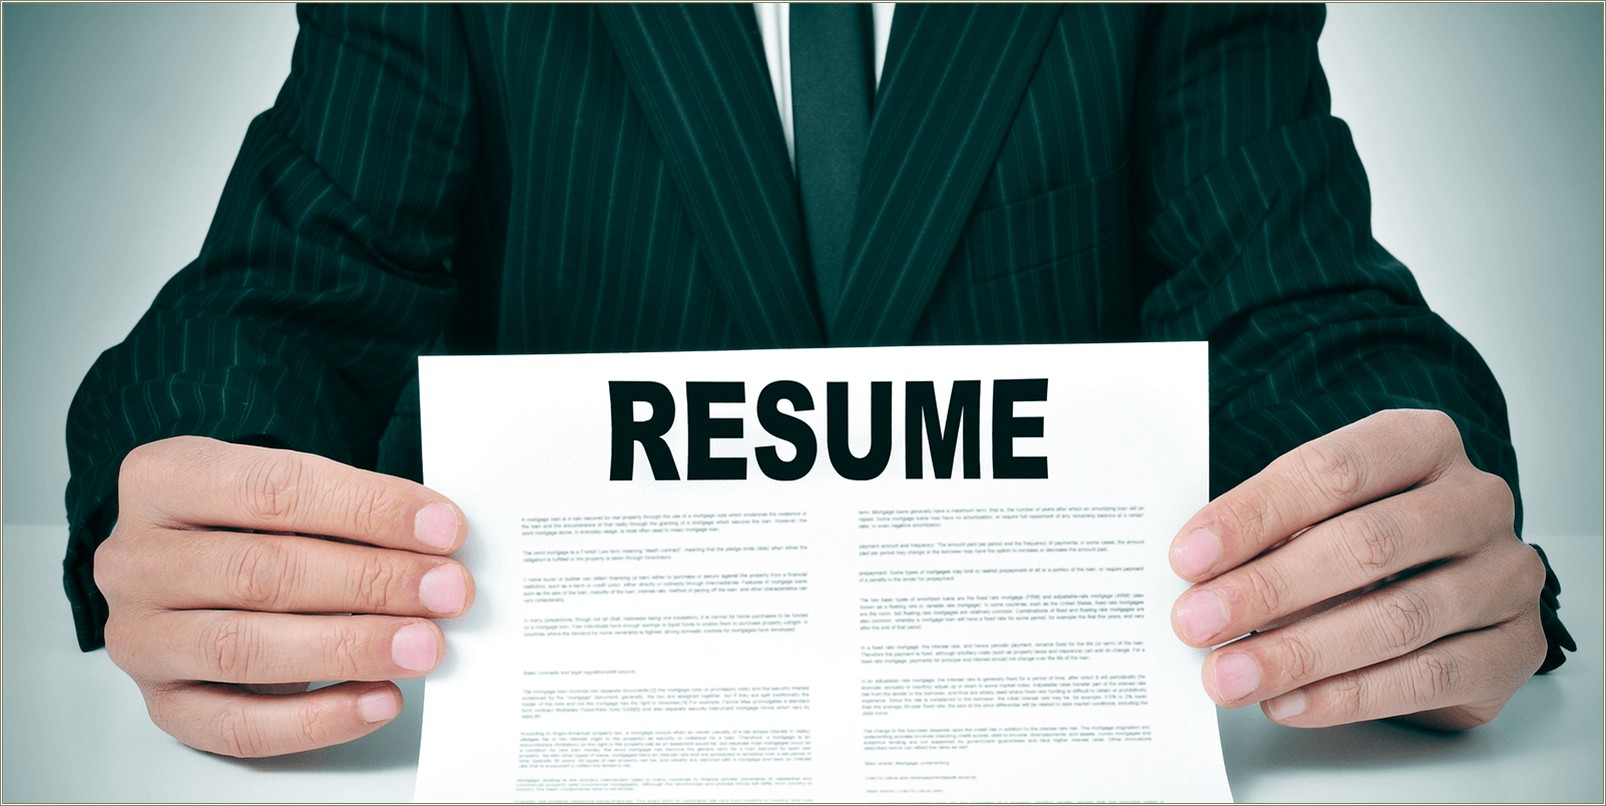 A Functional Resume Format Works Best If You